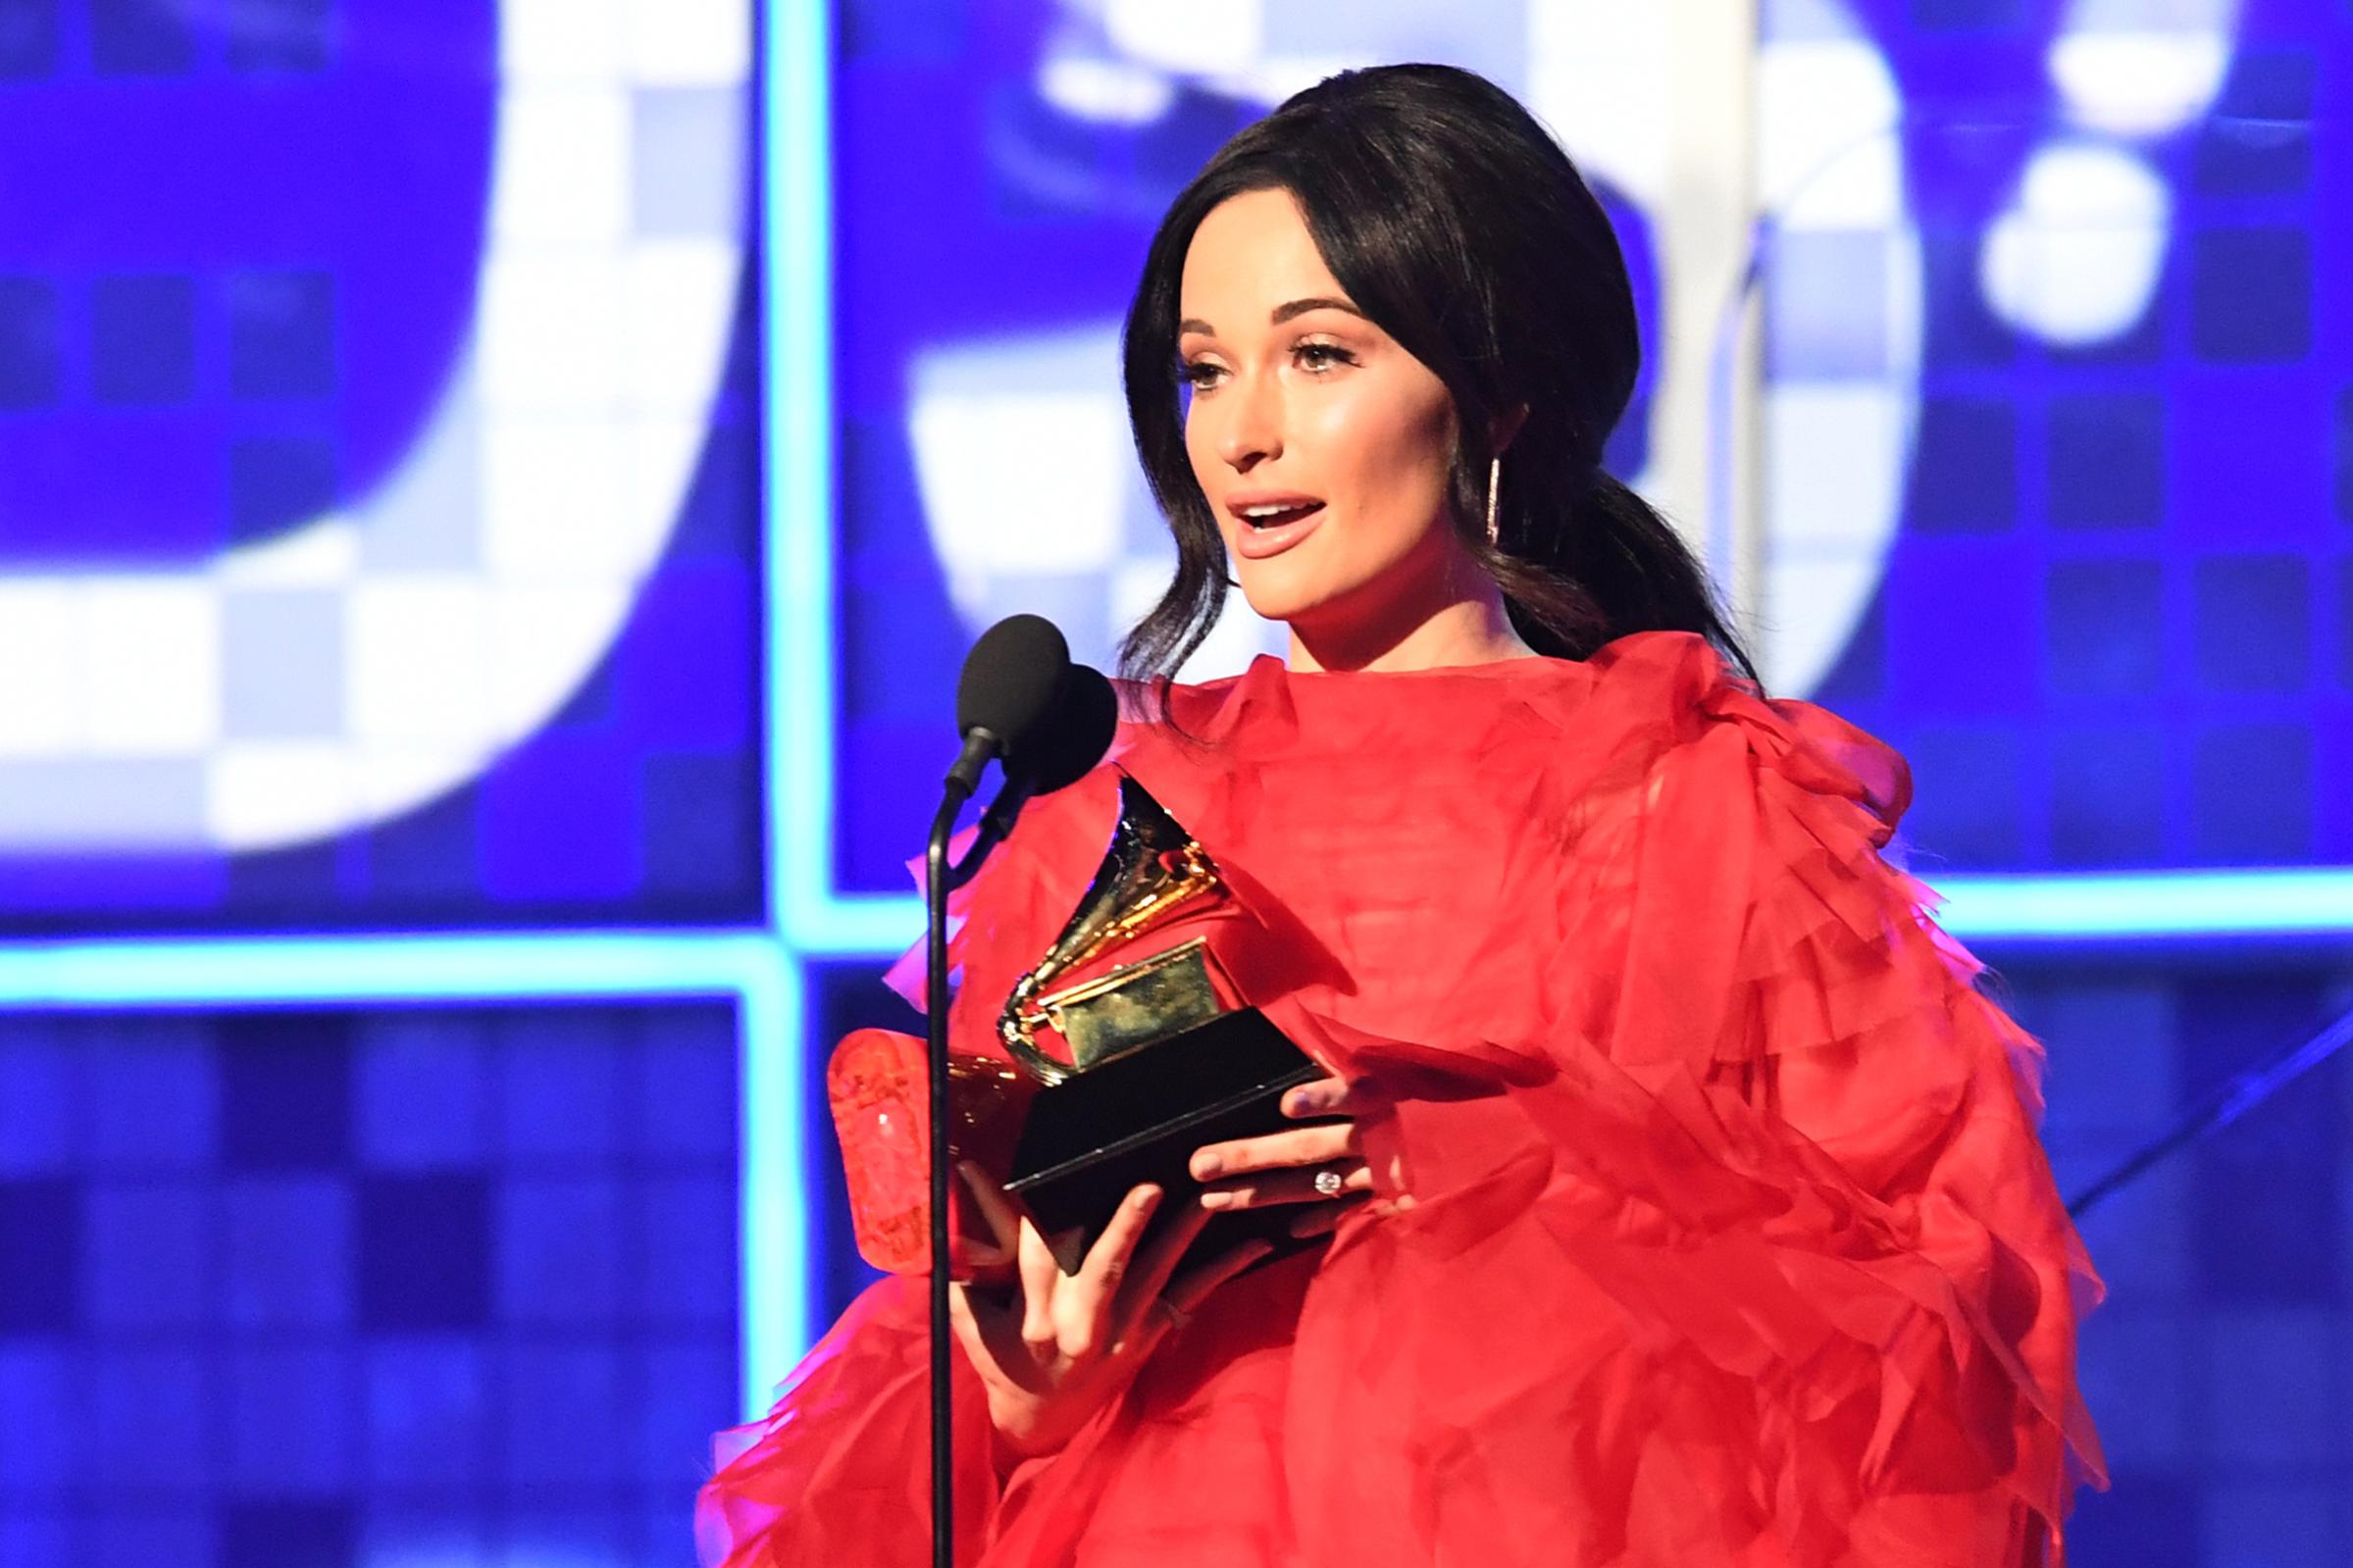 Kacey Musgraves accepts the award for Album Of The Year for "Golden Hour" onstage during the 61st Annual Grammy Awards